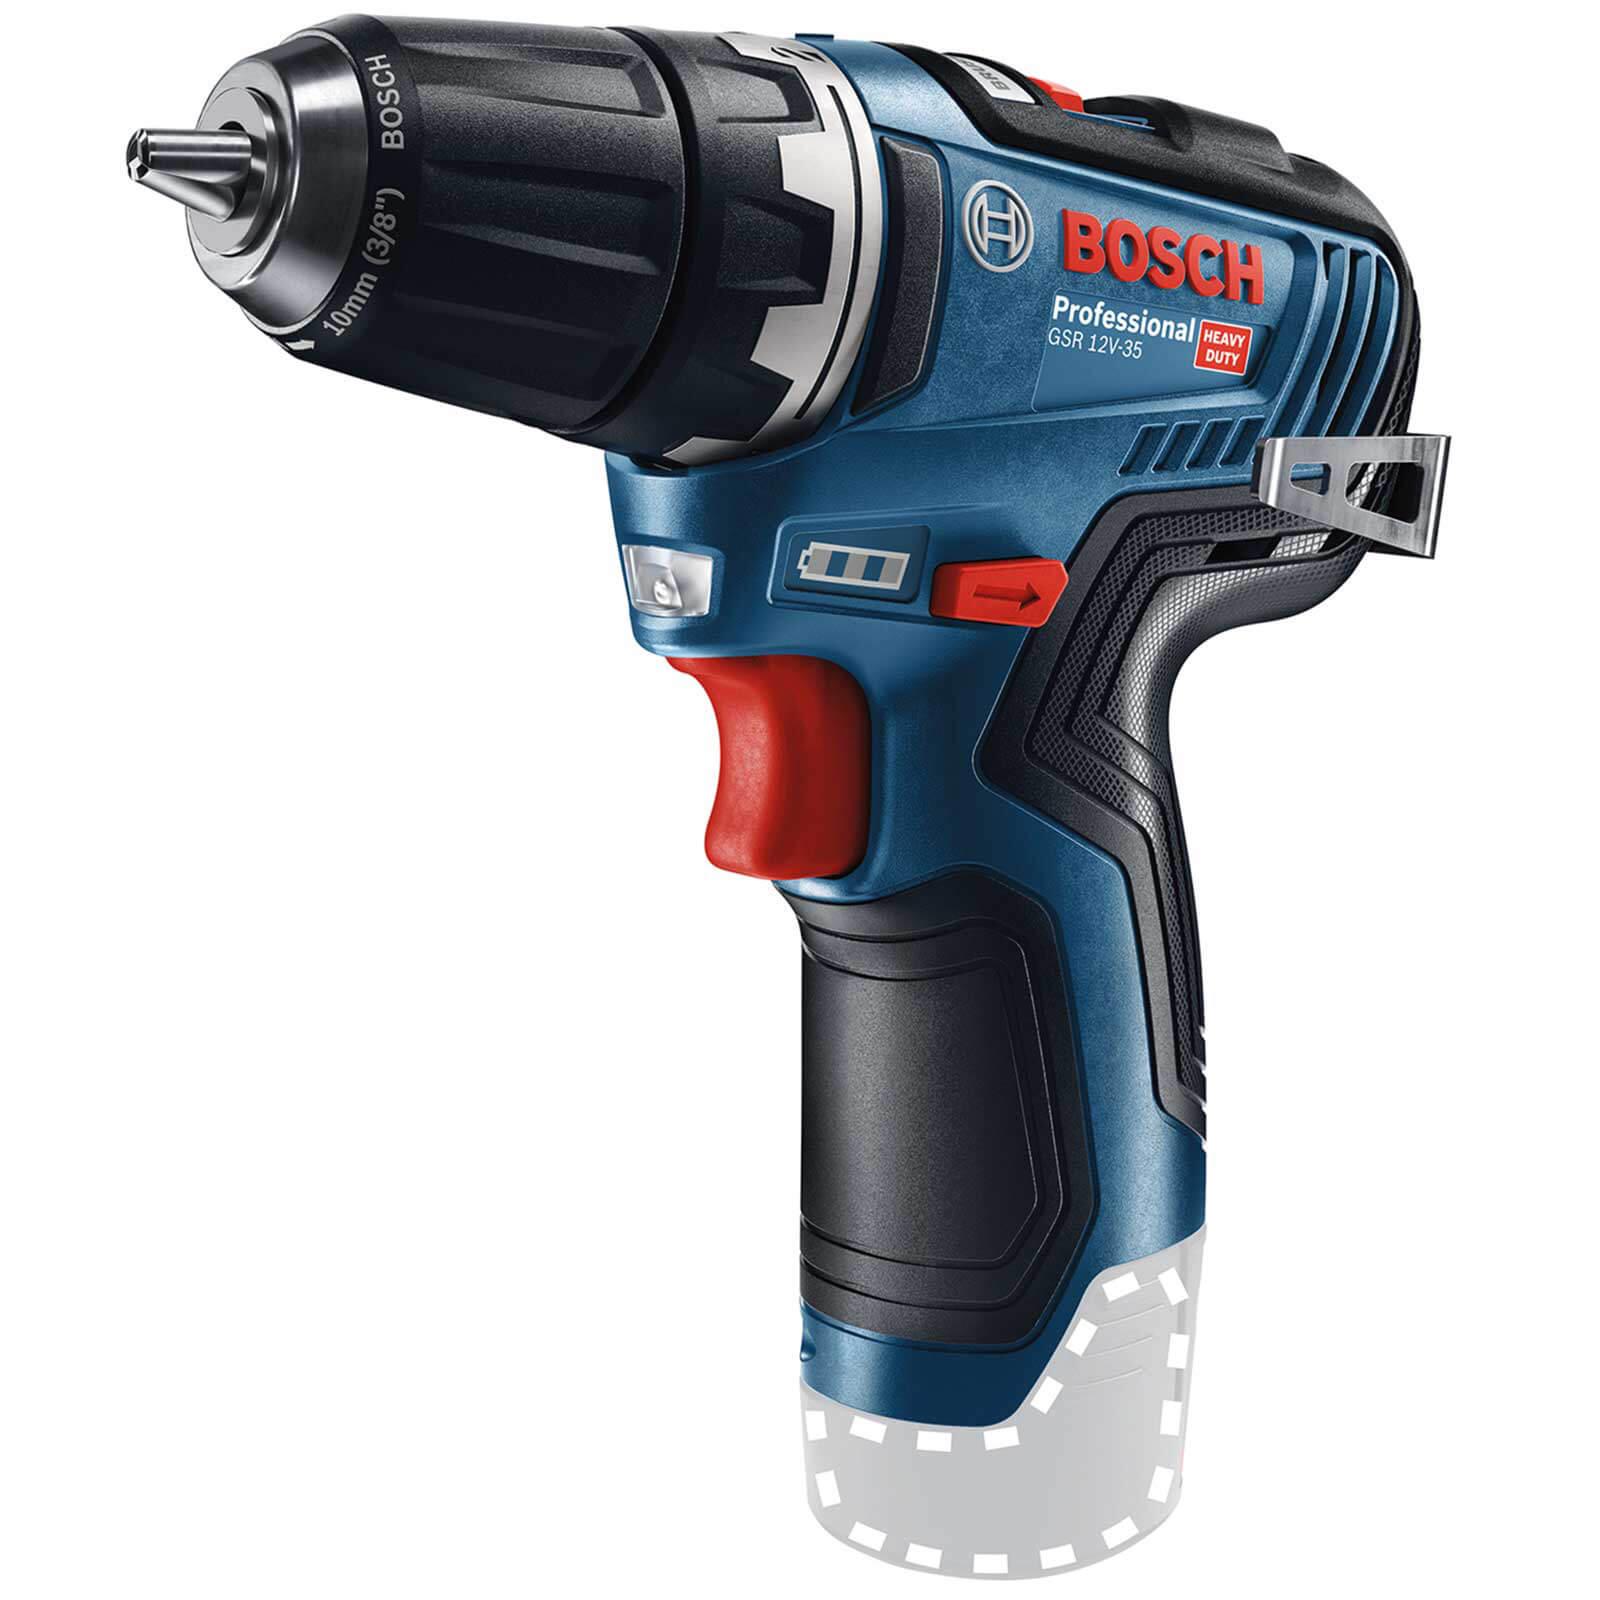 Image of Bosch GSR 12V-35 12v Cordless Brushless Drill Driver No Batteries No Charger No Case